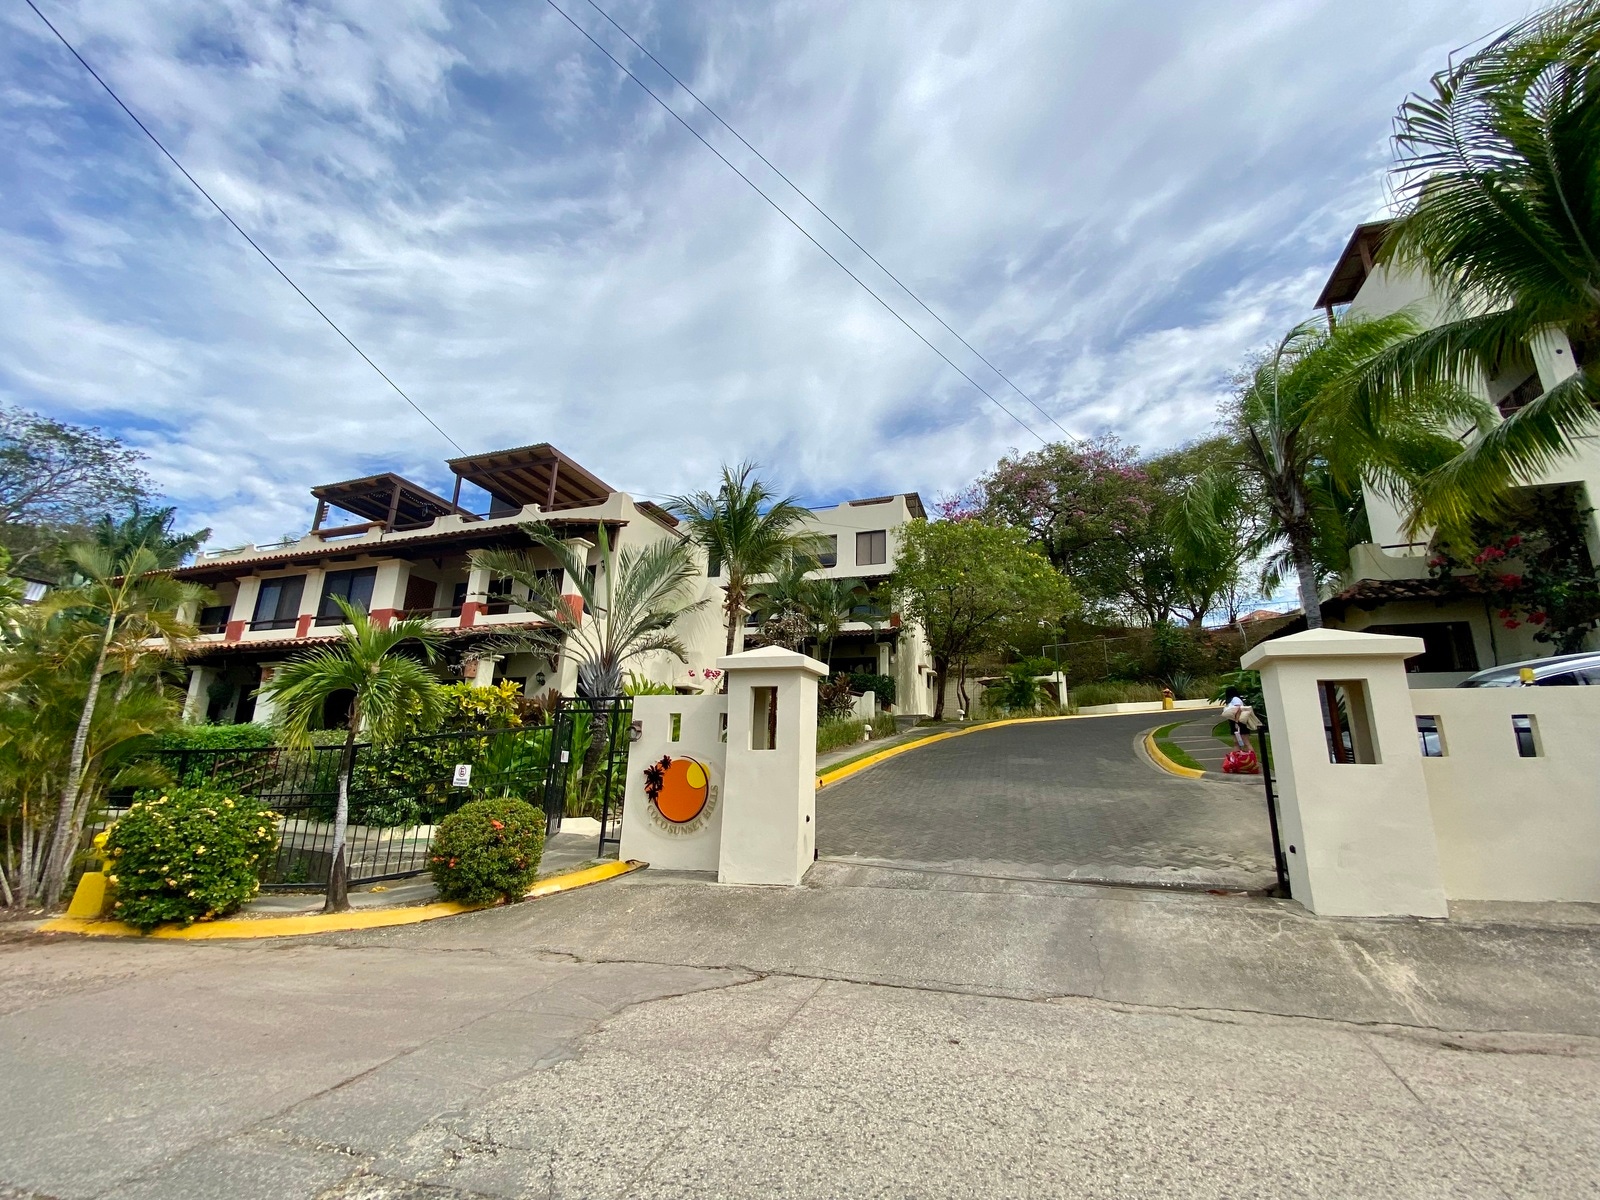 For Sale: Coco Sunset Hill One Bedroom With Rooftop Deck, #09, Papagayo,  Sardinal, Carrillo, Guanacaste, Costa Rica 50503 | 1 Bed / 1 Full Bath |  $260,000